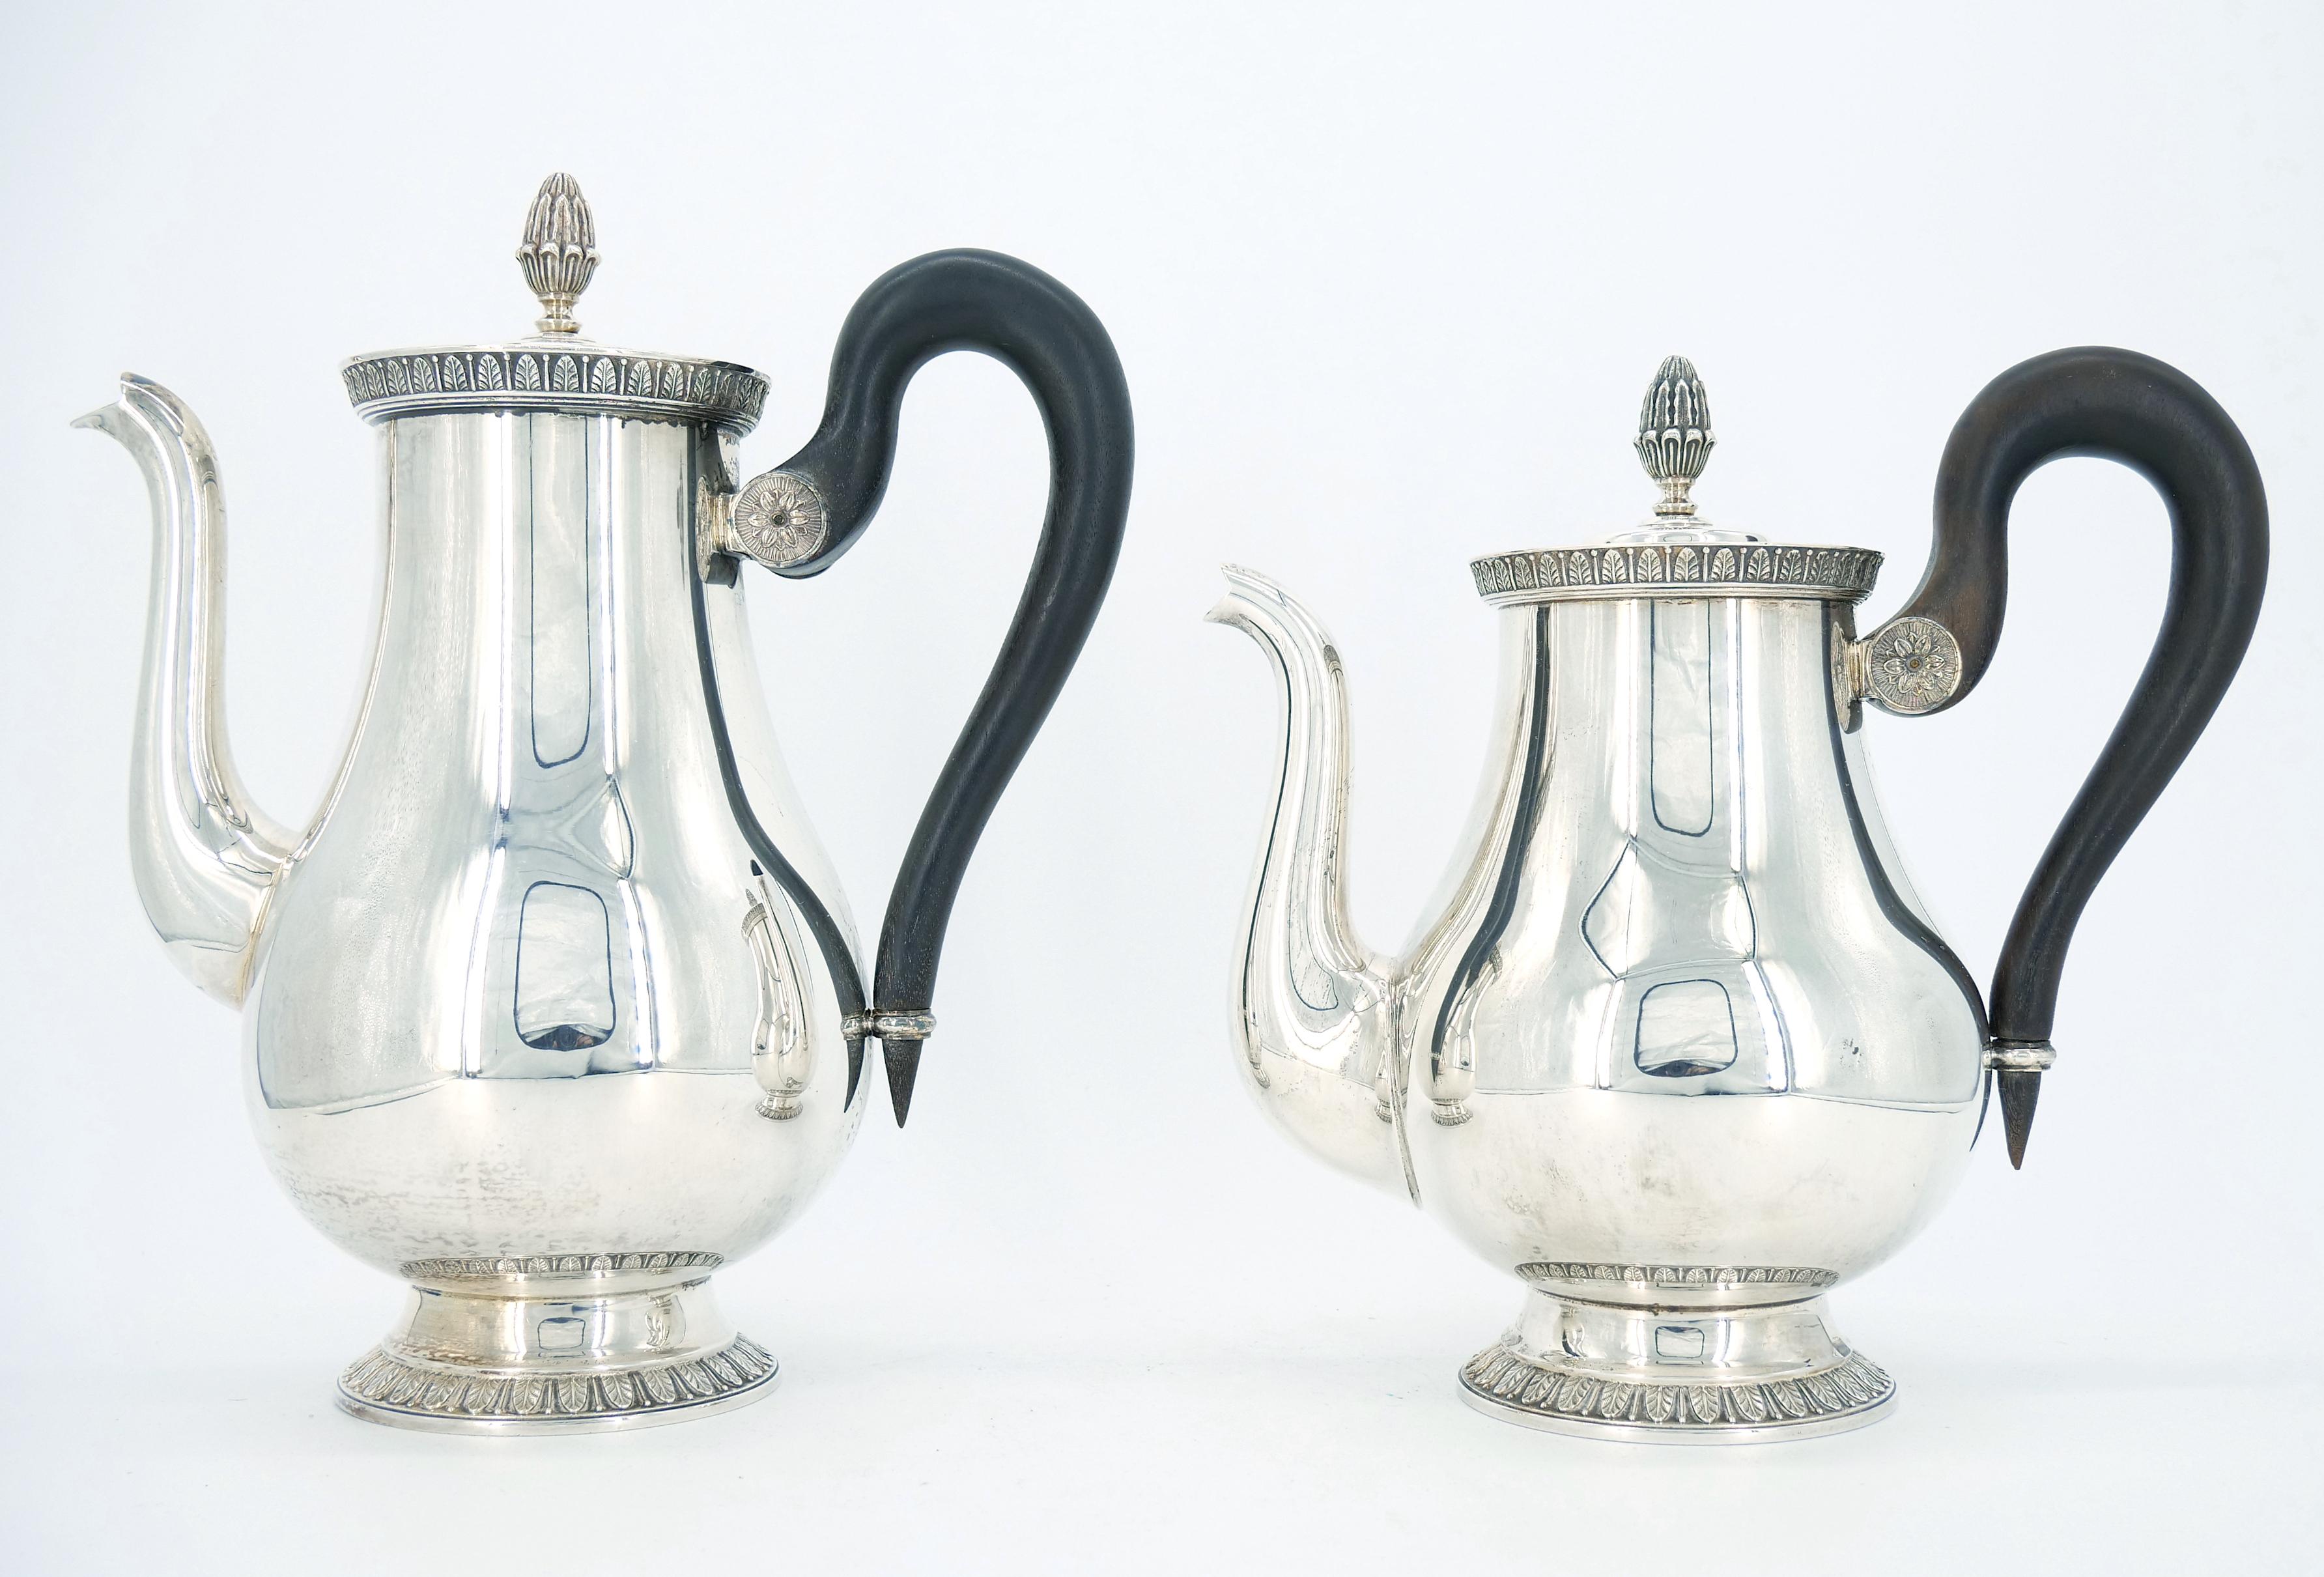 20th Century French Silver Plate Five Piece Tea / Coffee Service by Christofle